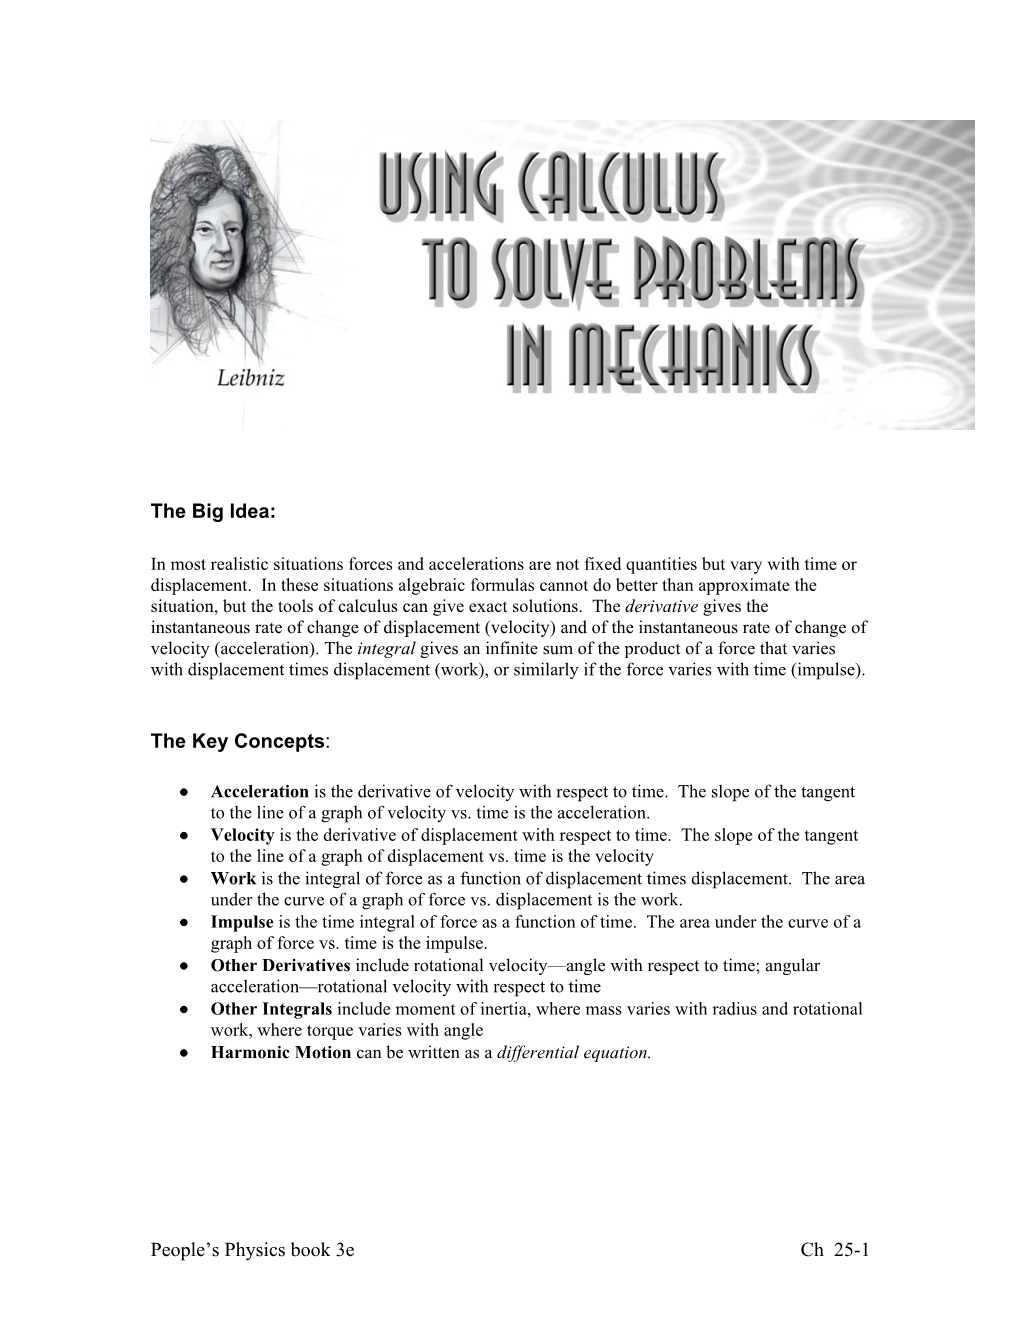 Ch. 25 Using Calculus with Physics